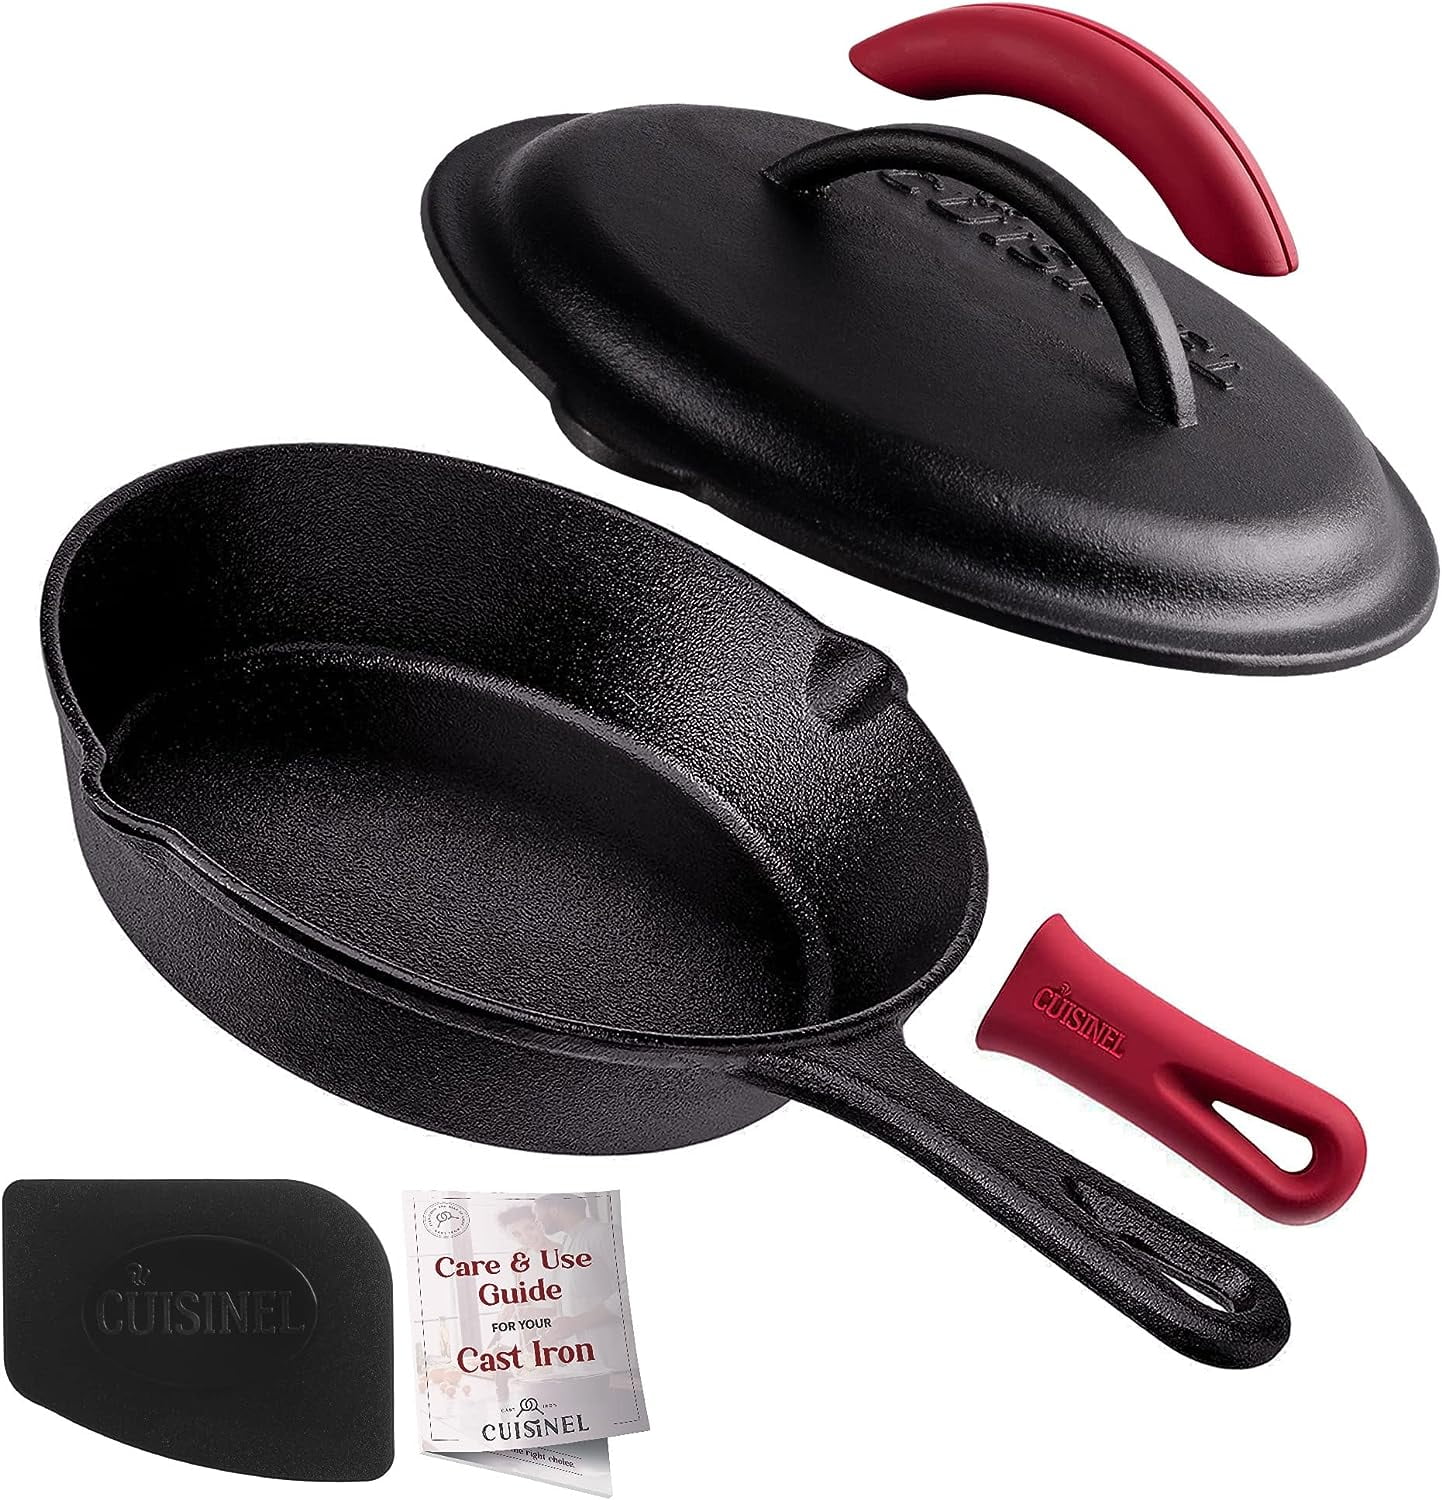 Cast Iron Skillet with Lid - 10-inch Pre-Seasoned Covered Frying